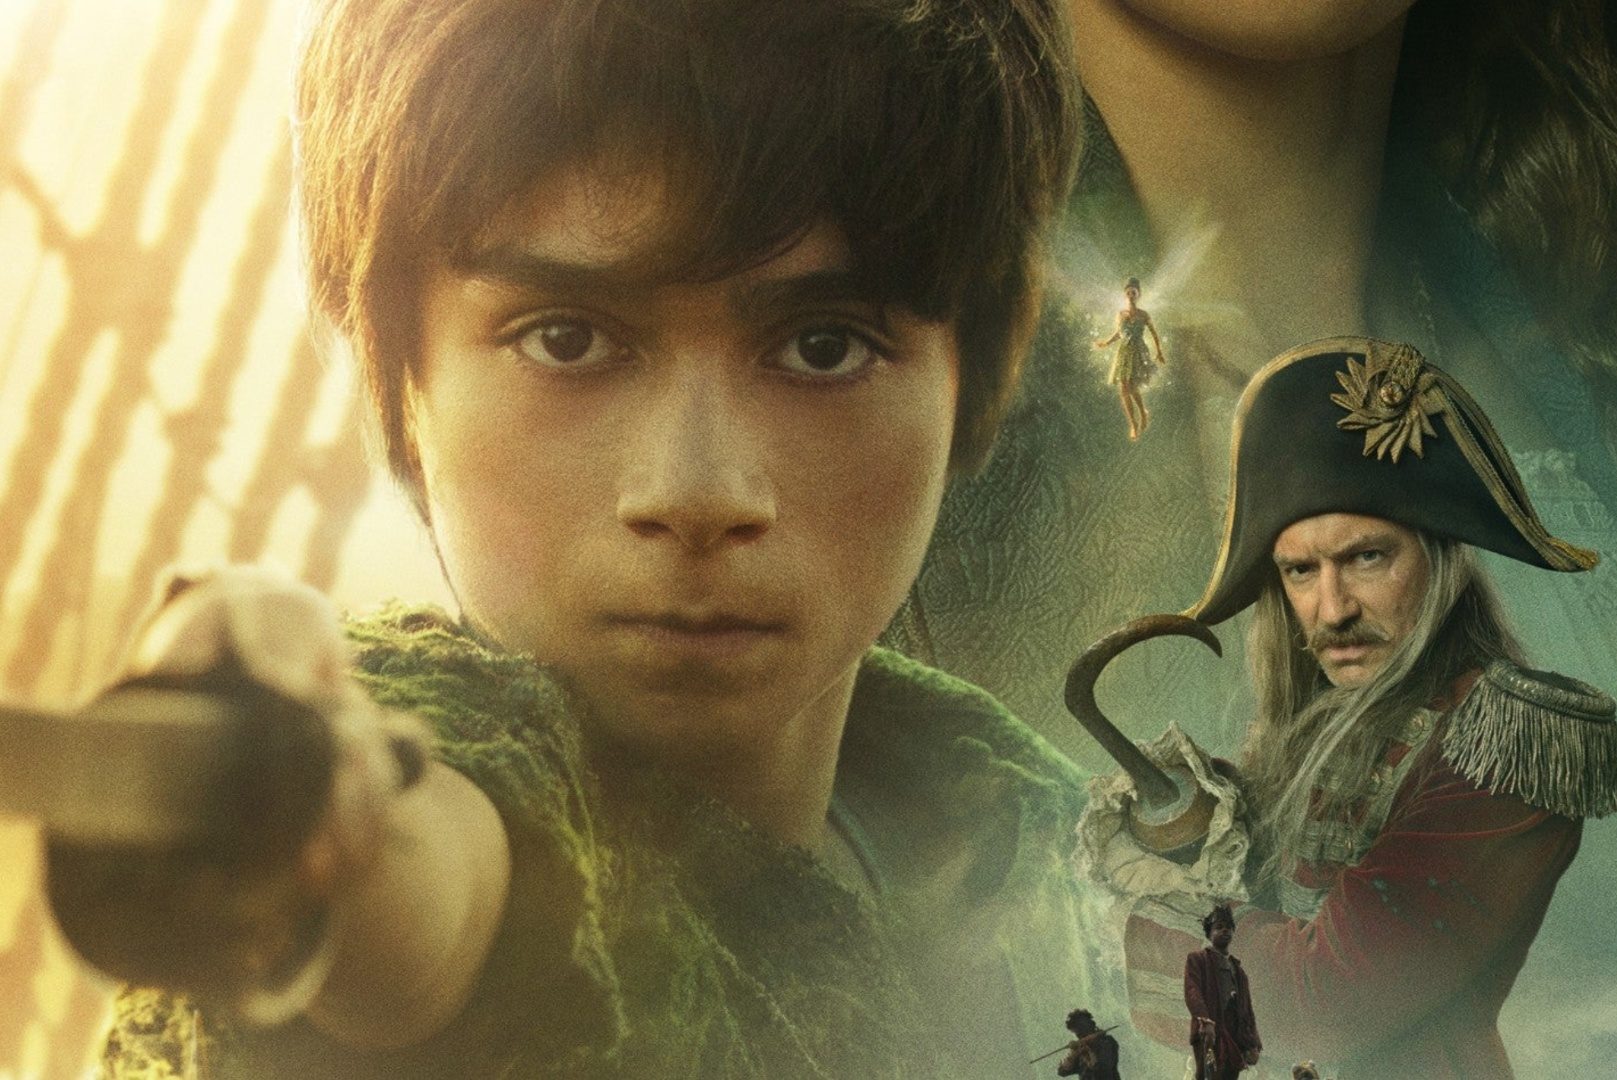 Peter Pan, Captain Hook, and Tinker Bell in a poster for Peter Pan & Wendy.